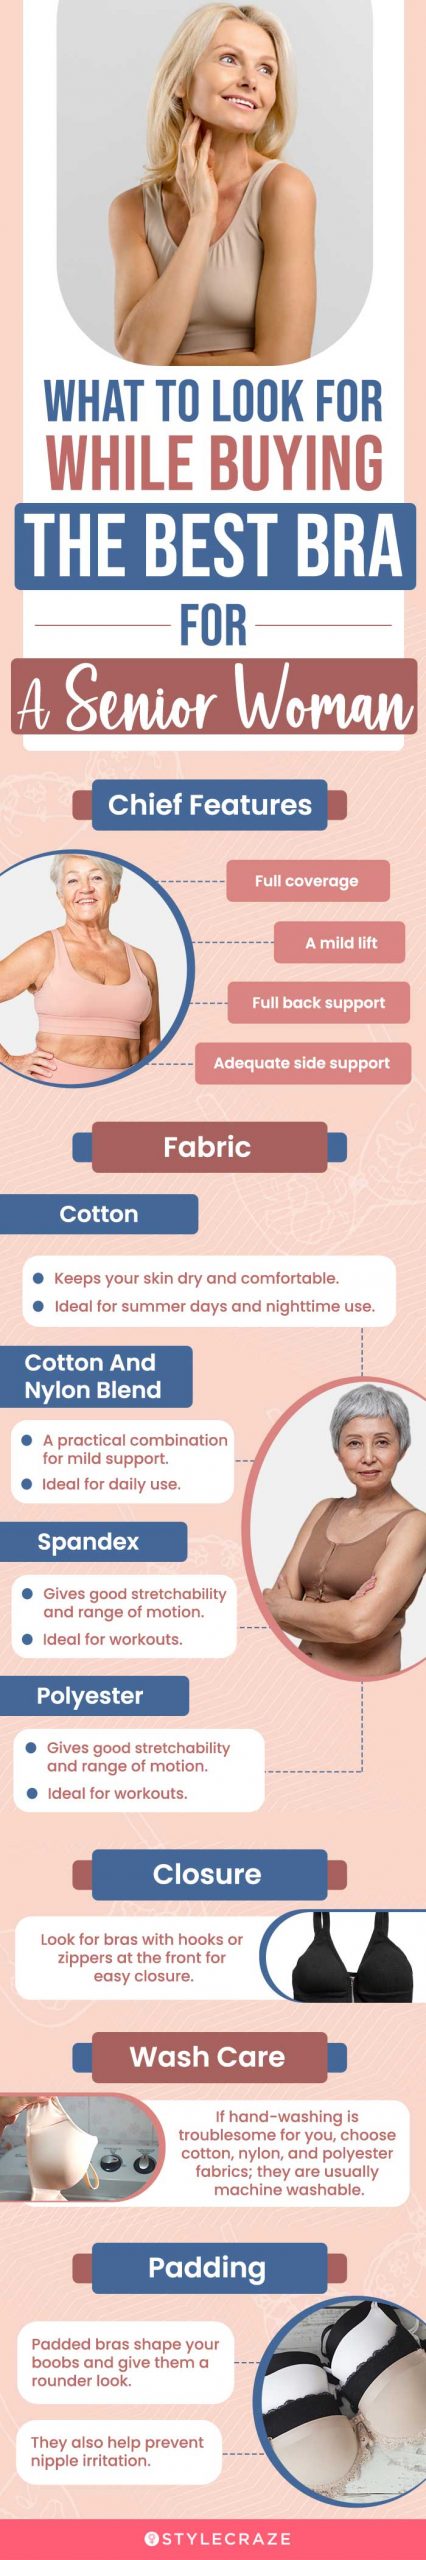 What To Look For While Buying The Best Bra For A Senior Woman (infographic)